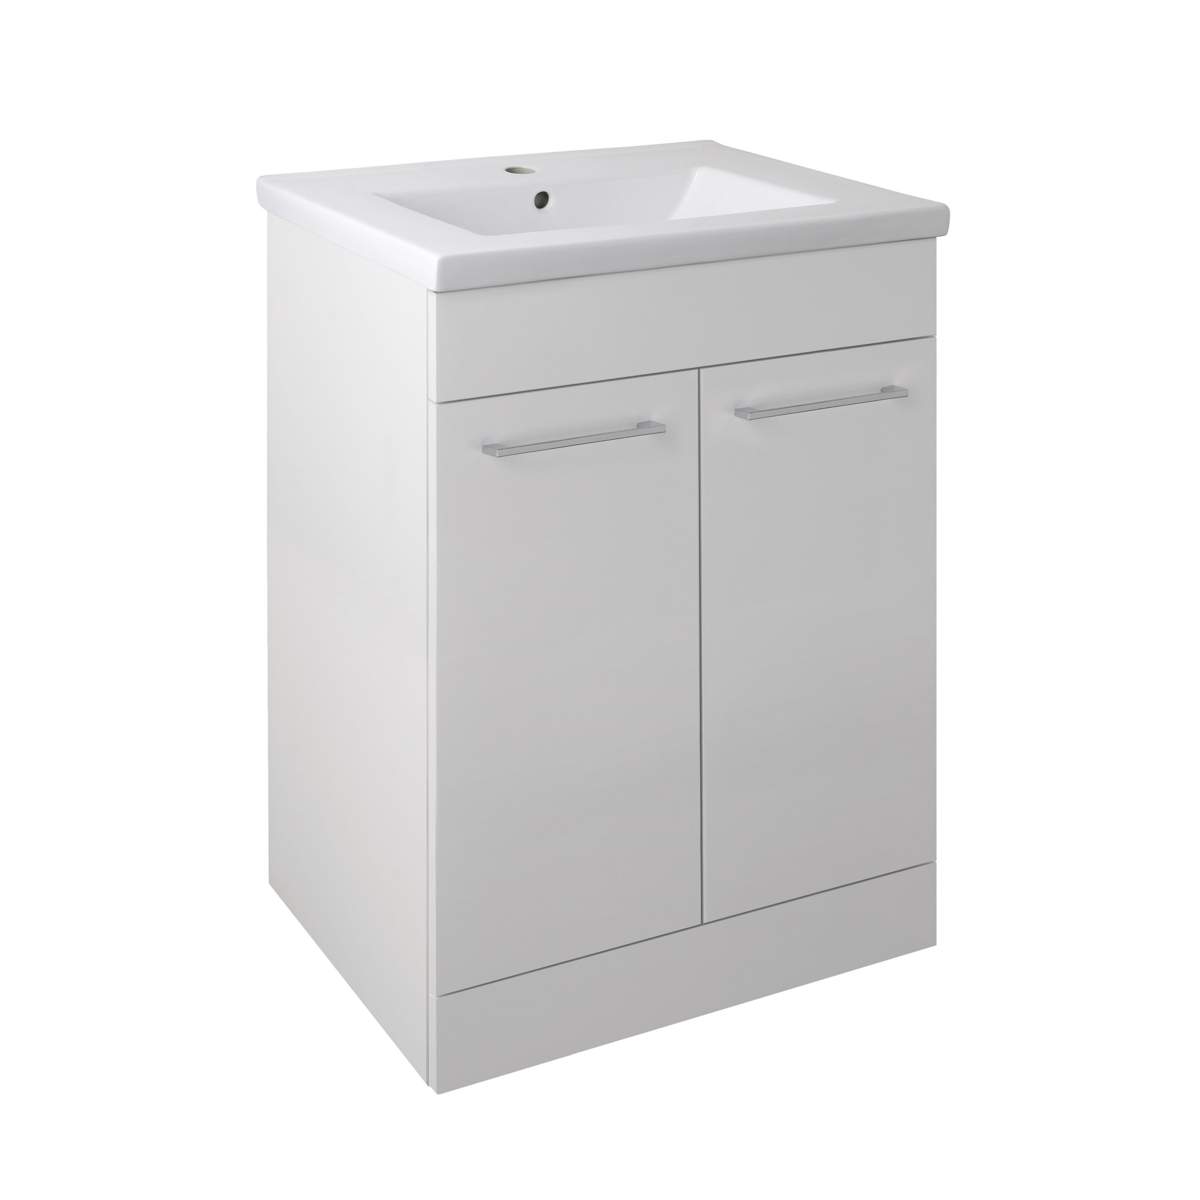 JTP Pace Units 600mm Floor Mounted Unit with Doors and Basin in White